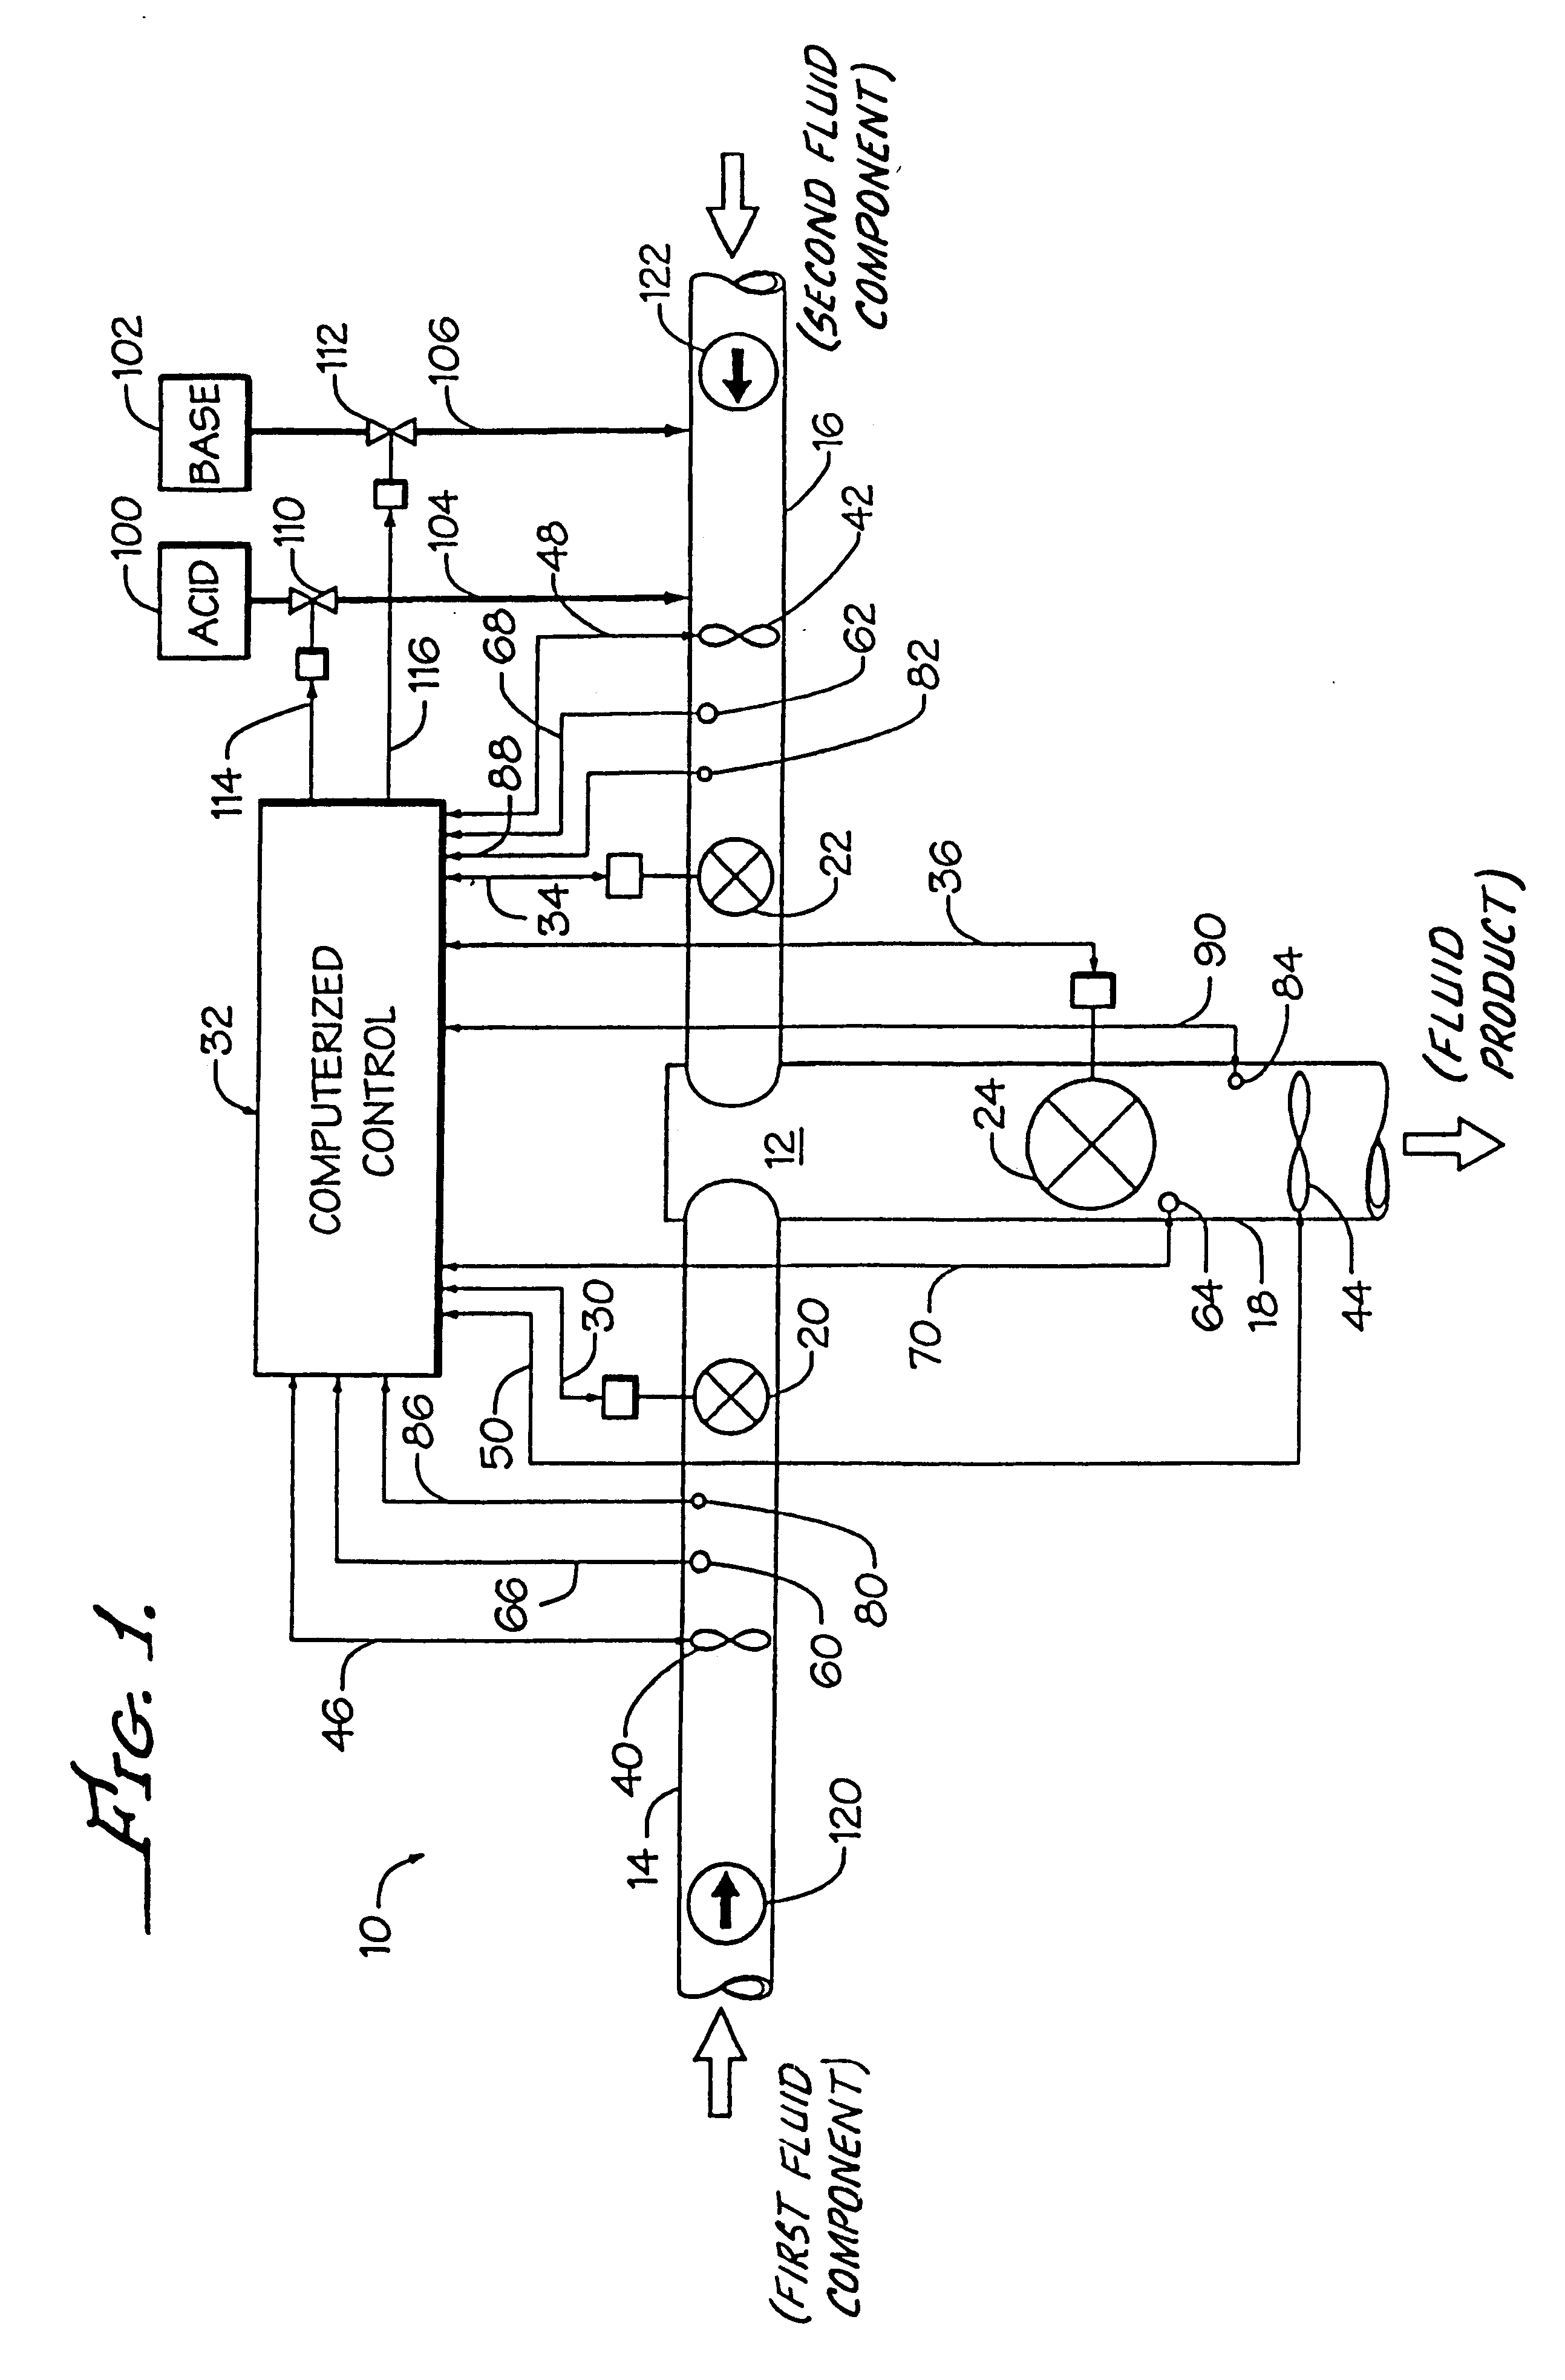 Method for manufacturing a system for mixing fluids